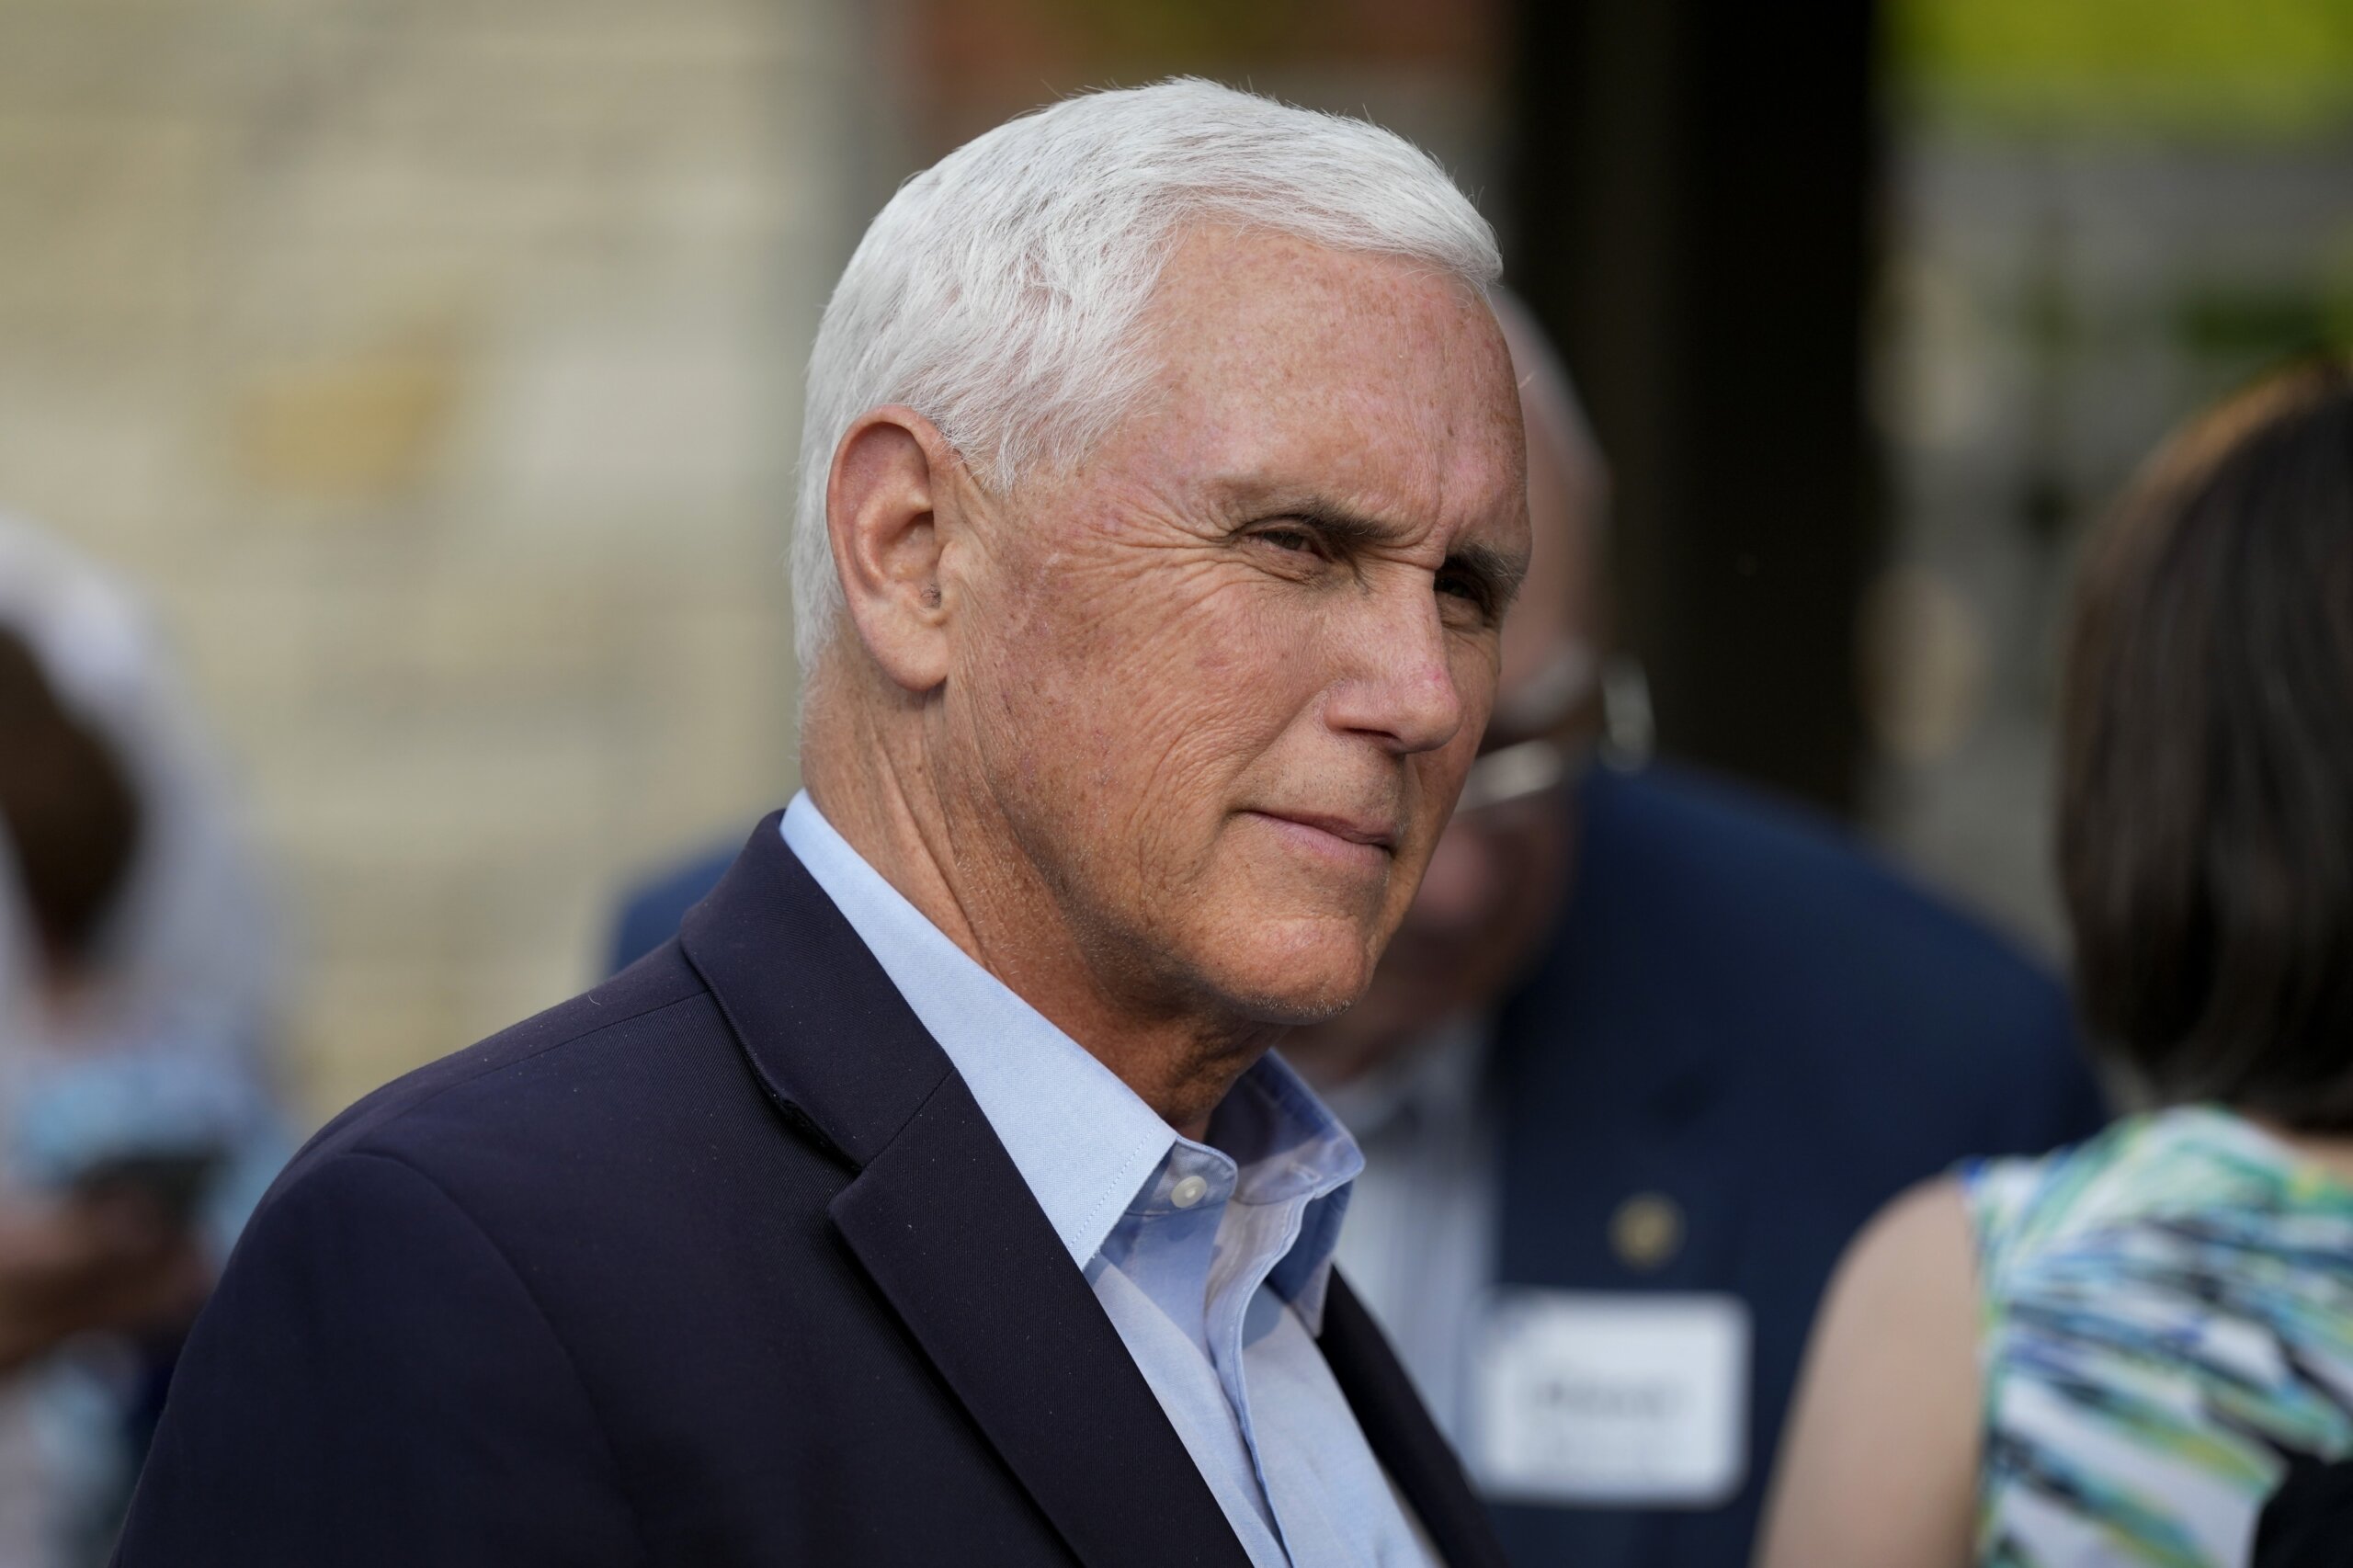 Former Vice President Pence files paperwork launching 2024 presidential